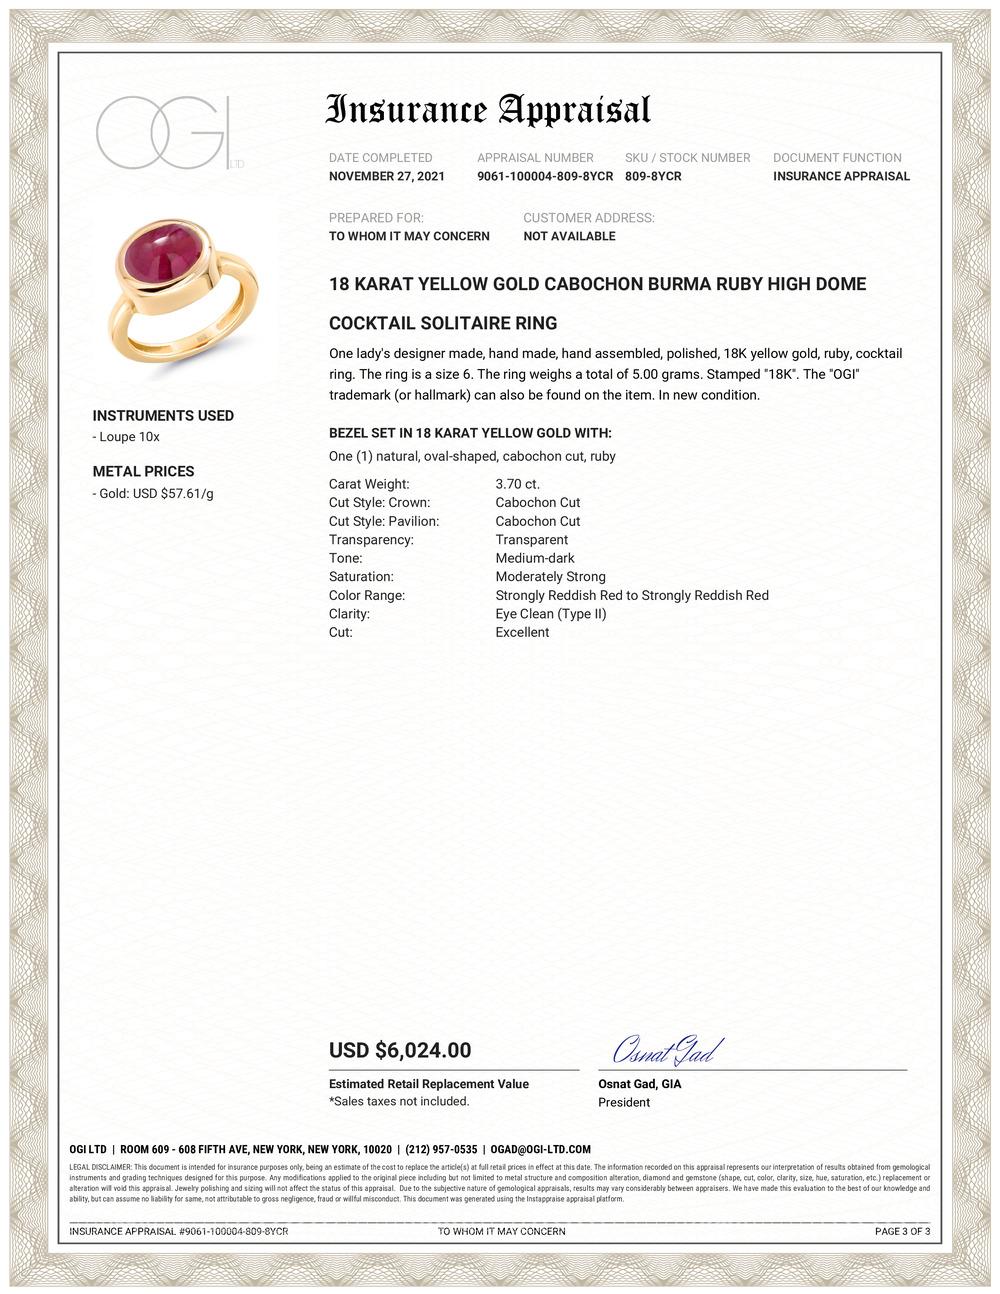 Eighteen Karat high dome yellow gold ruby ring 
Cabochon Burma ruby weighing 3.77 carat                                                              
Ring size 6 In Stock
Ring can be resized 
New Ring
Handmade in USA
Burmese Rubies are known for